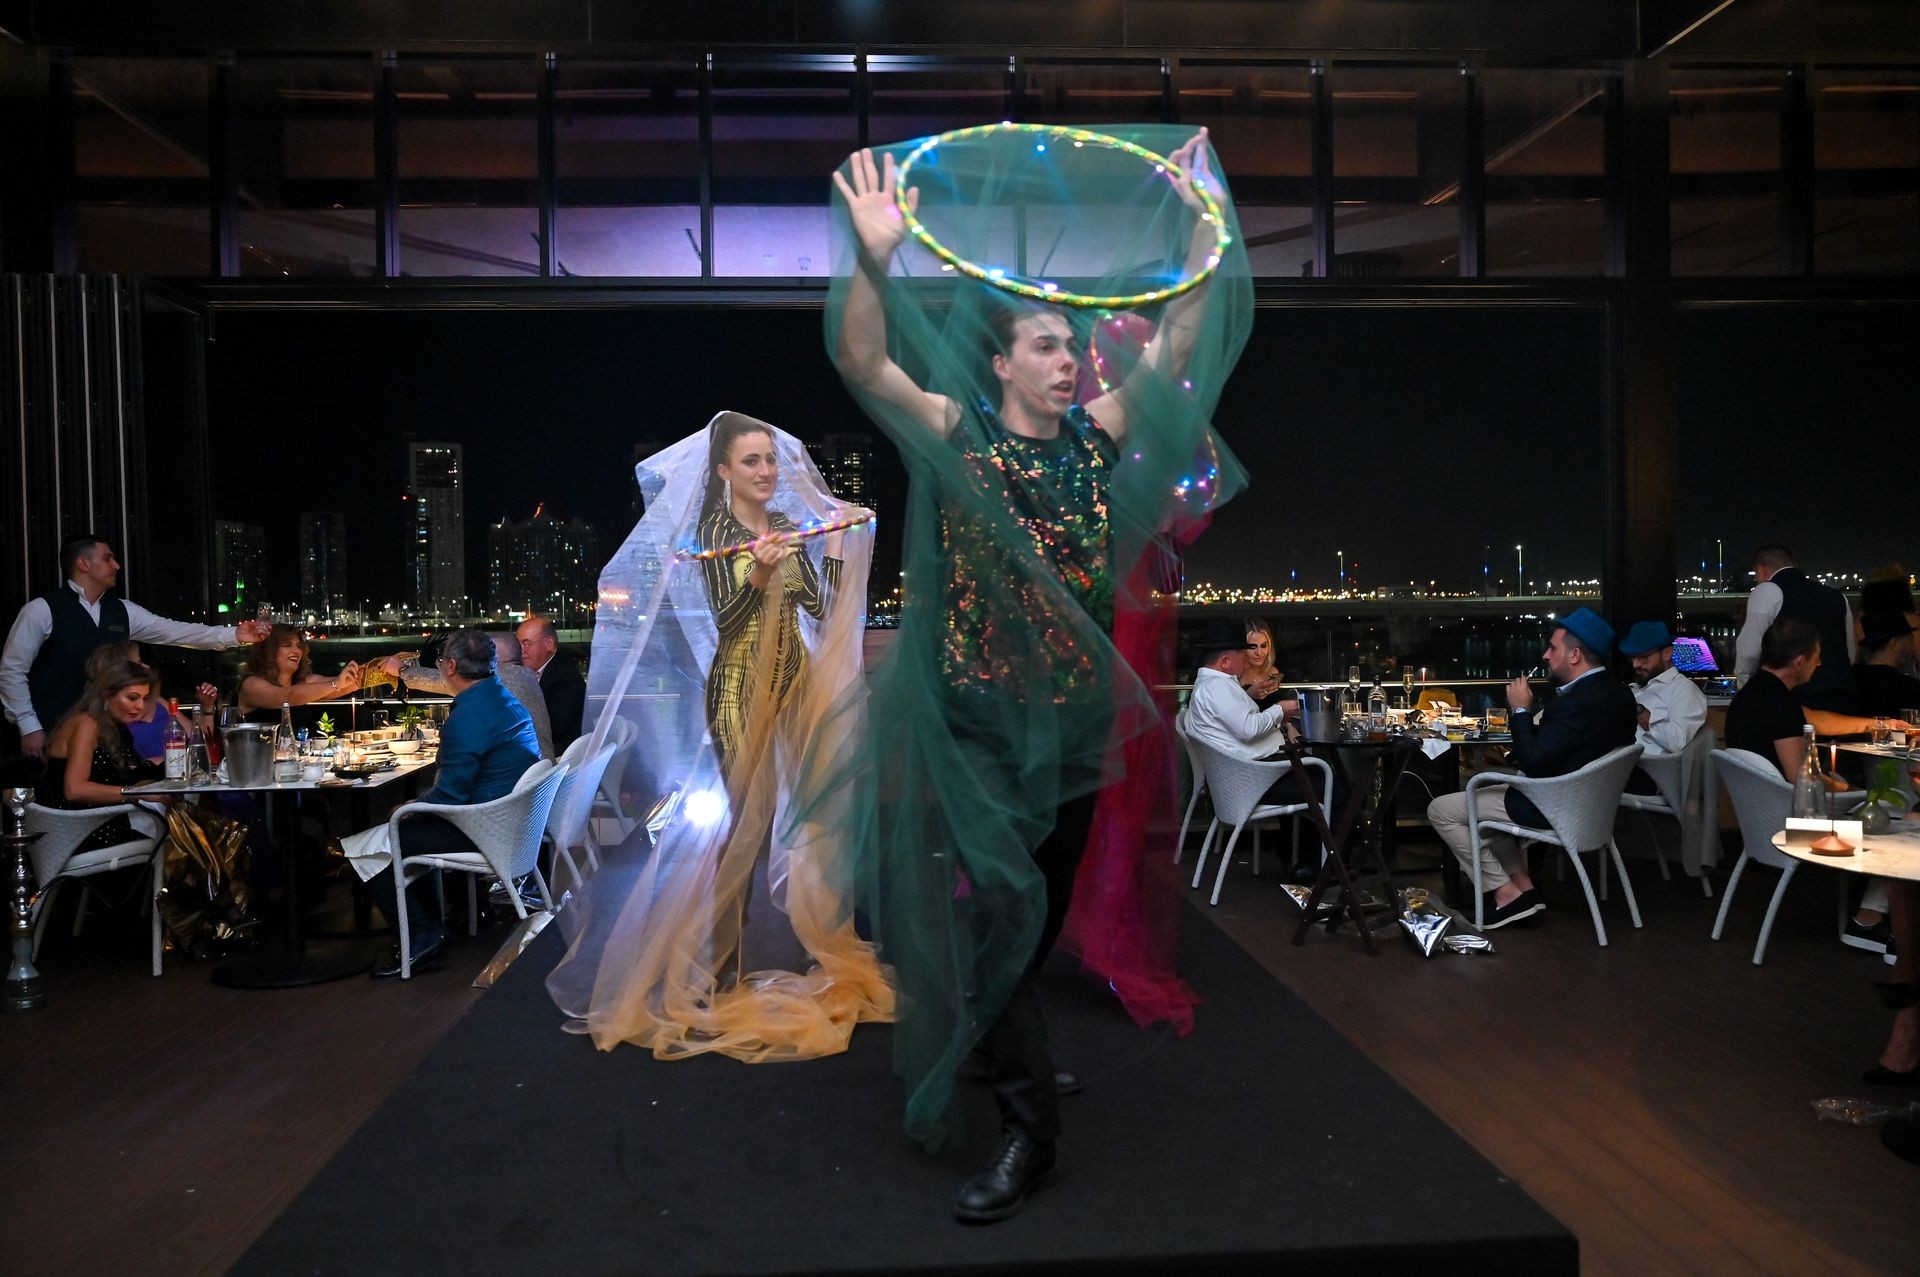 Dance performance at a fine dining restaurant in Abu Dhabi